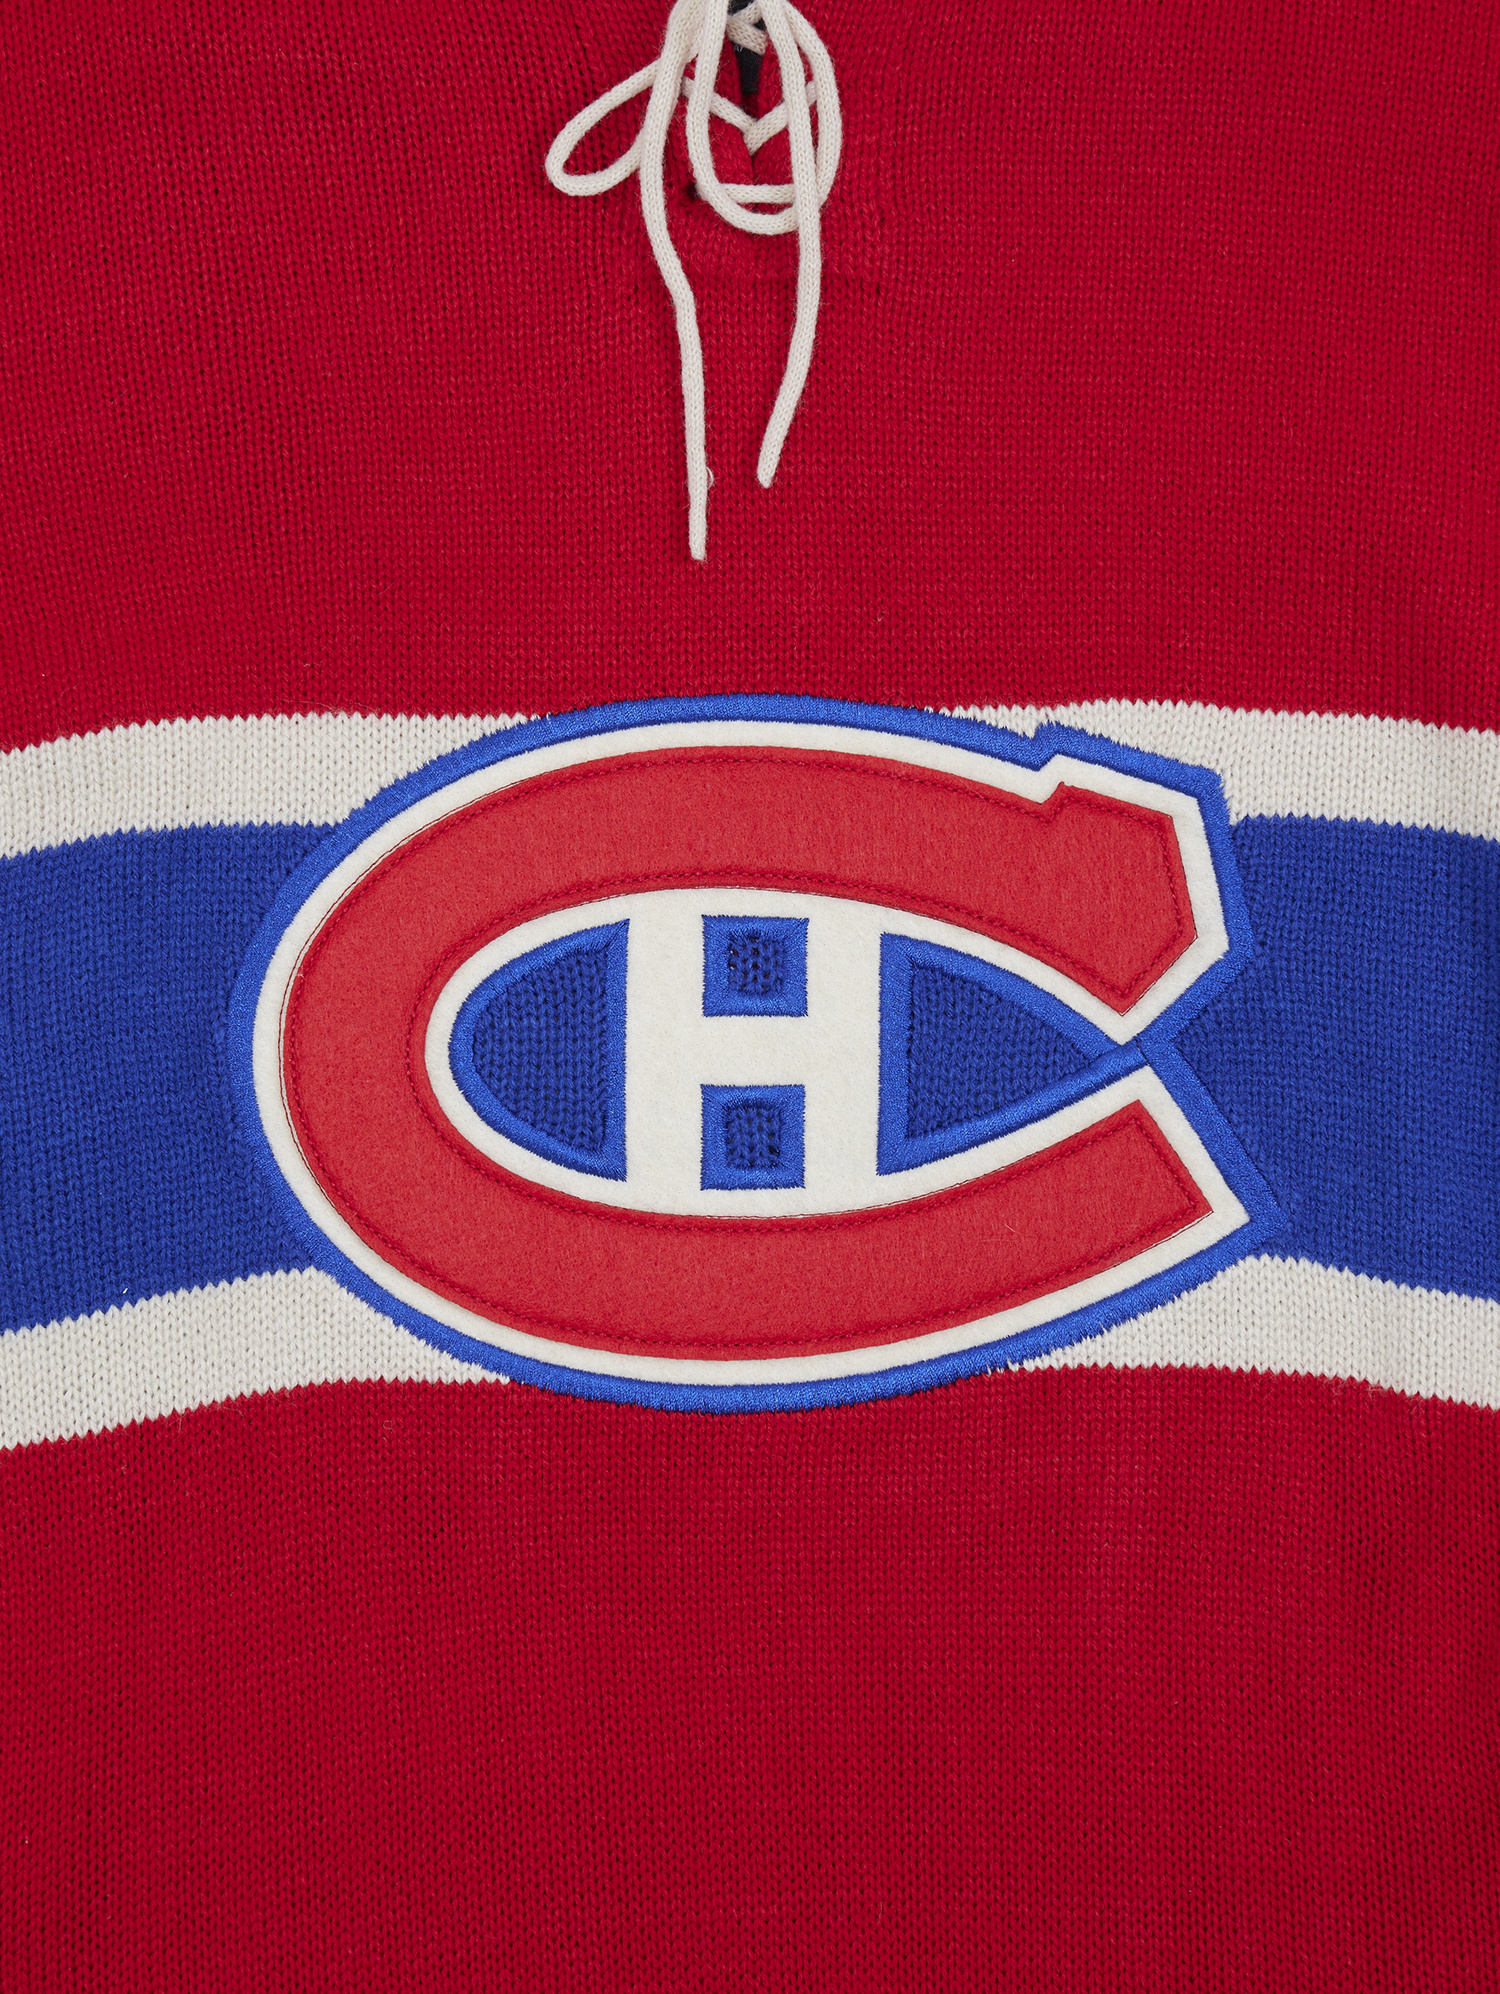 PHT Jersey Review: Montreal Canadiens 1912-13 retro uniforms - NBC